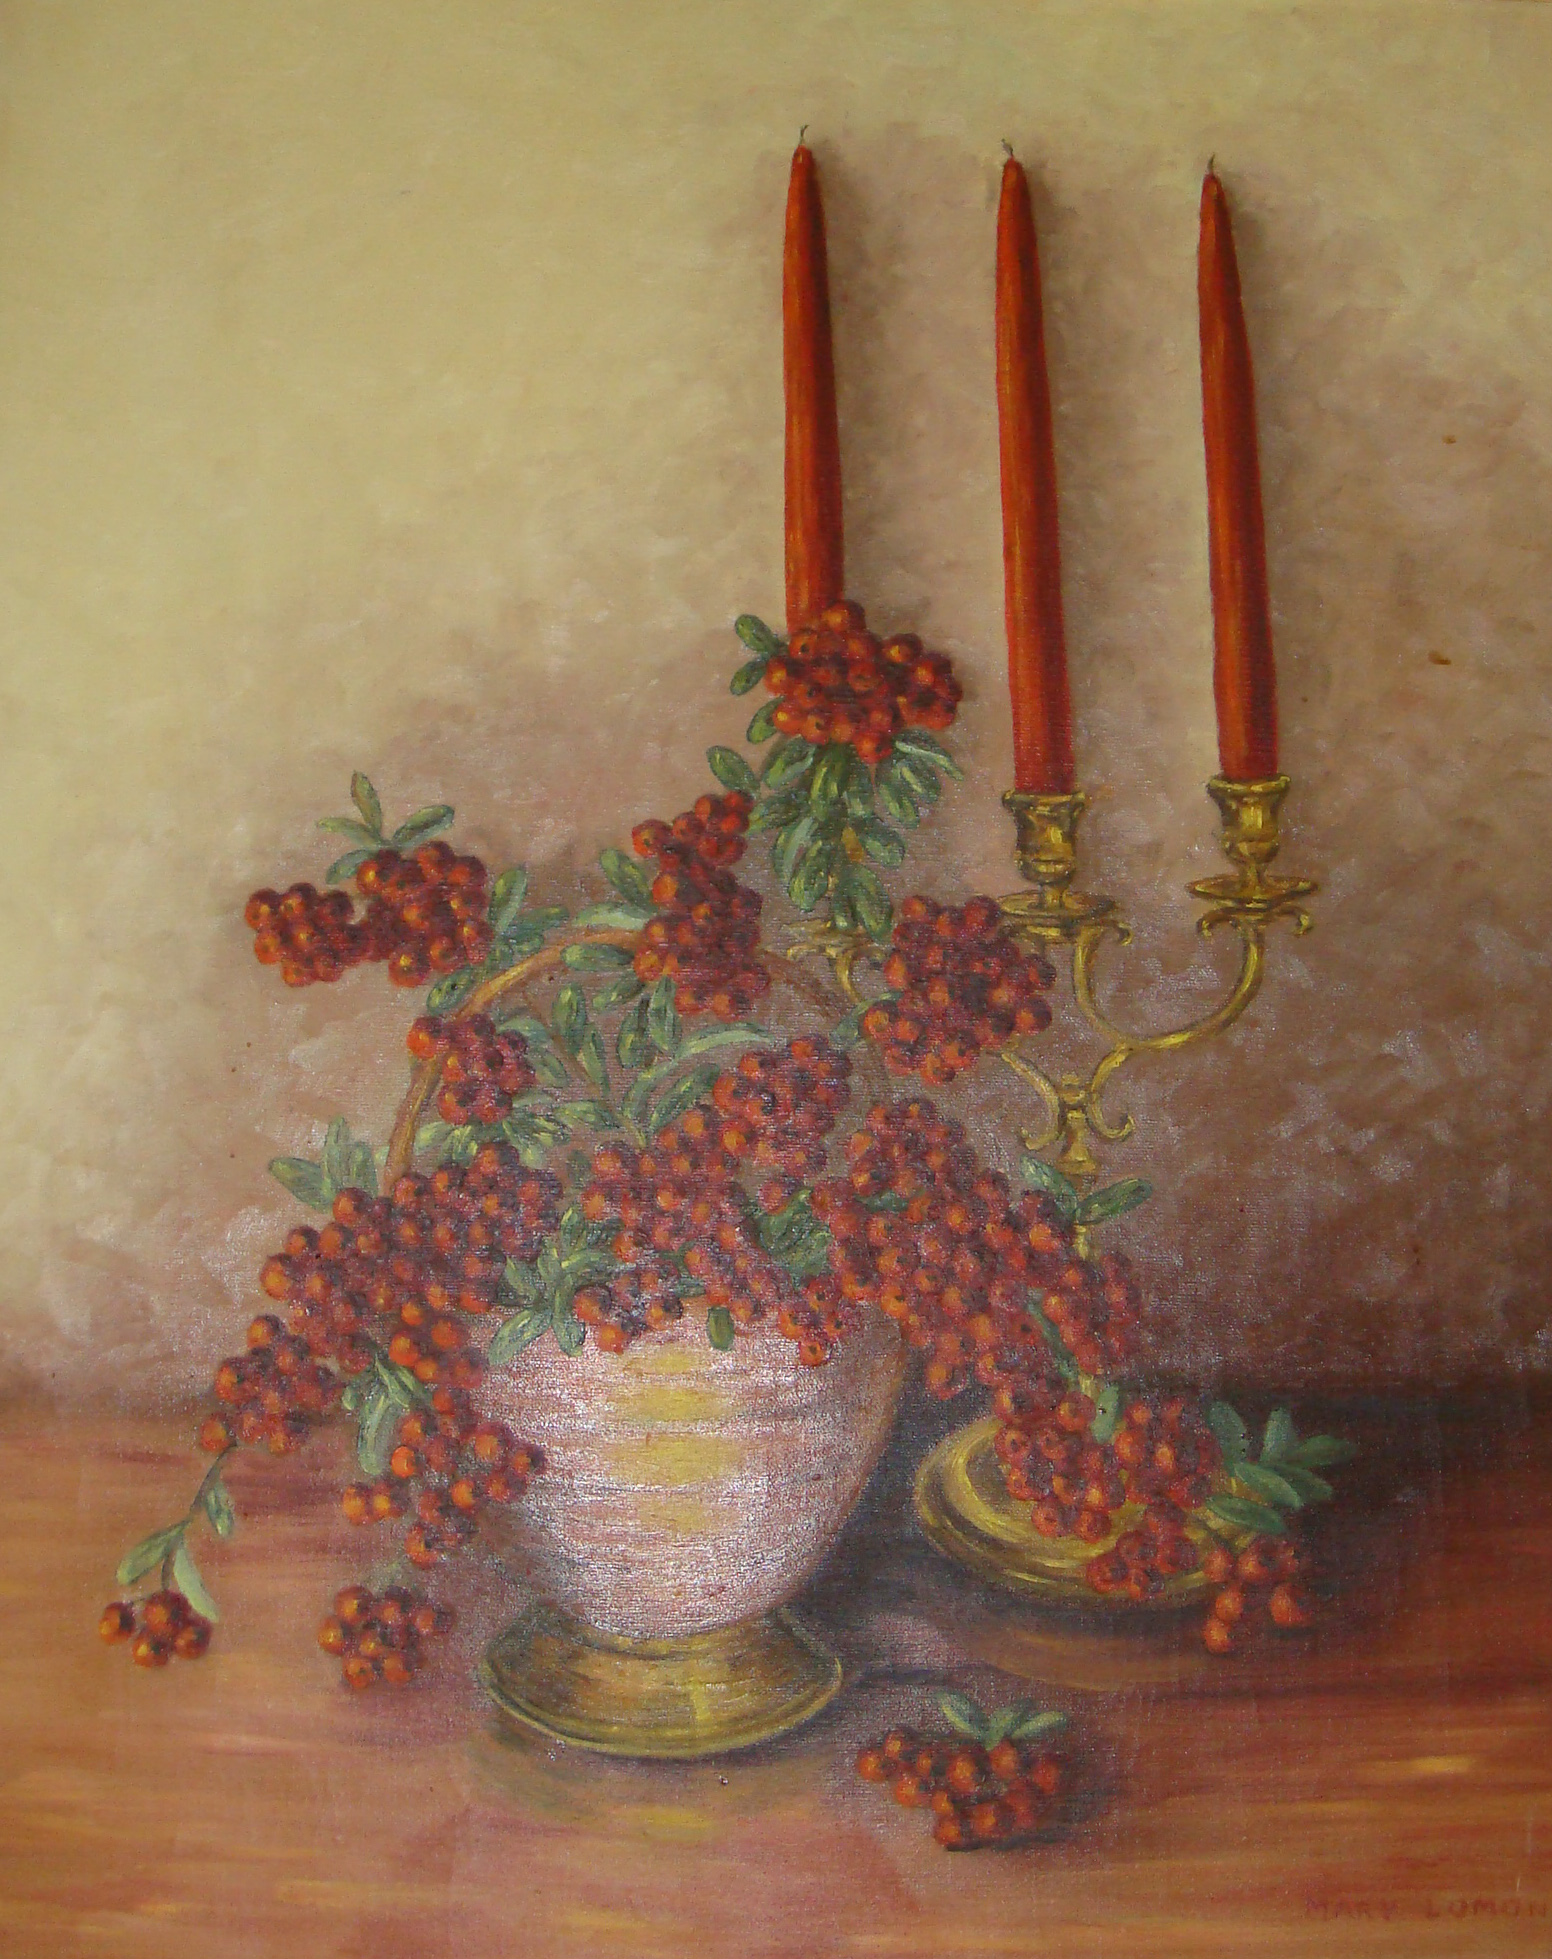 Oil painting by Mary Lomonaco